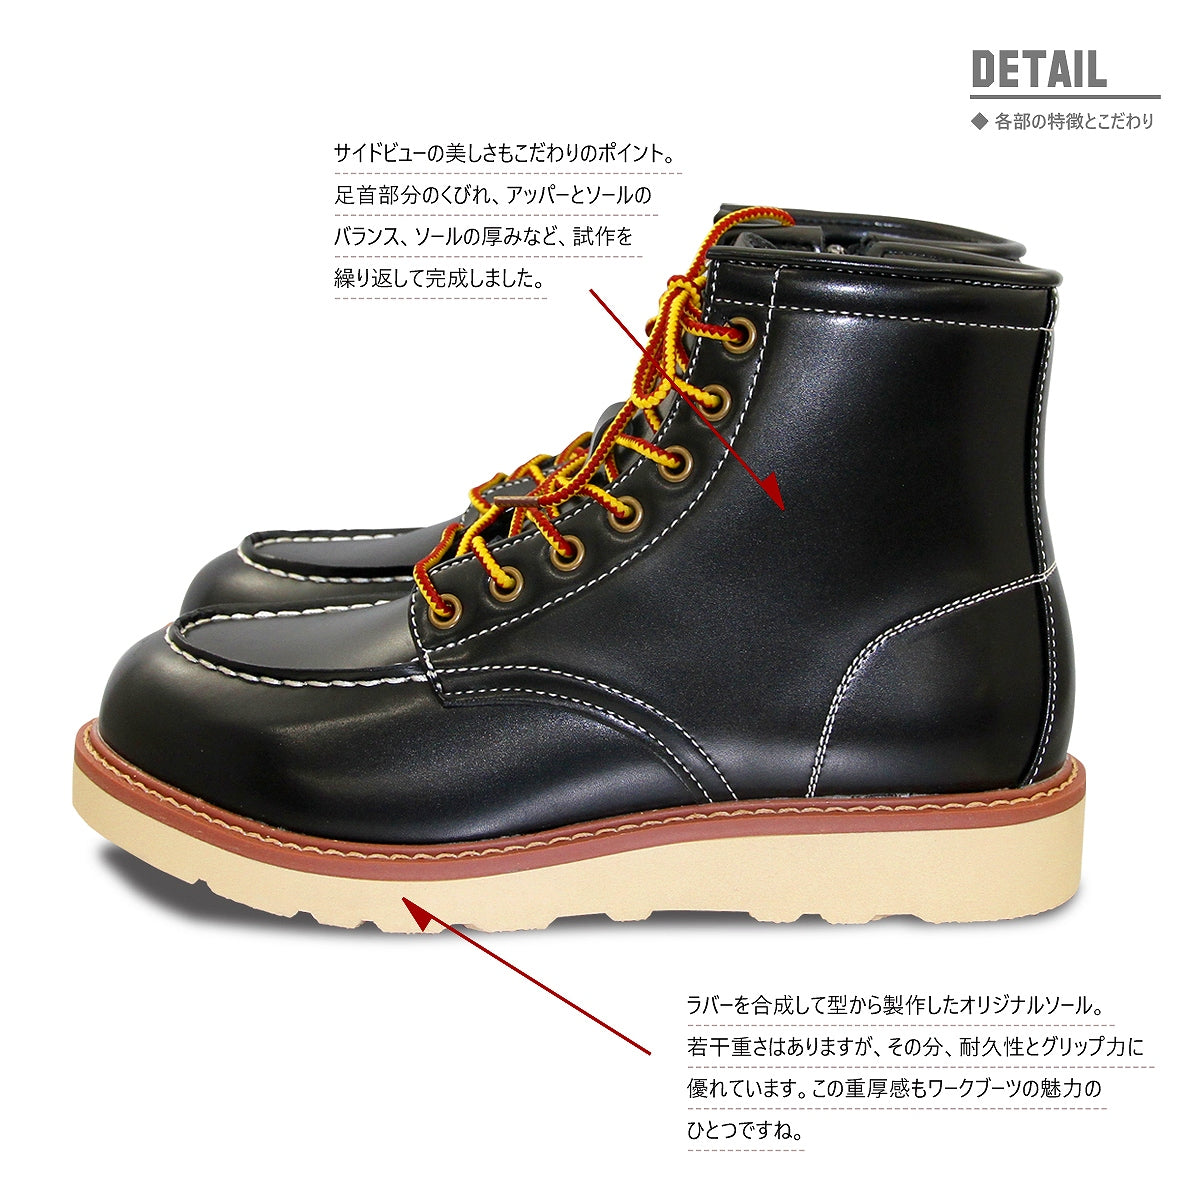 [GOD&amp;BLESS] Work boots black/red brown boots BIG size GB-7810